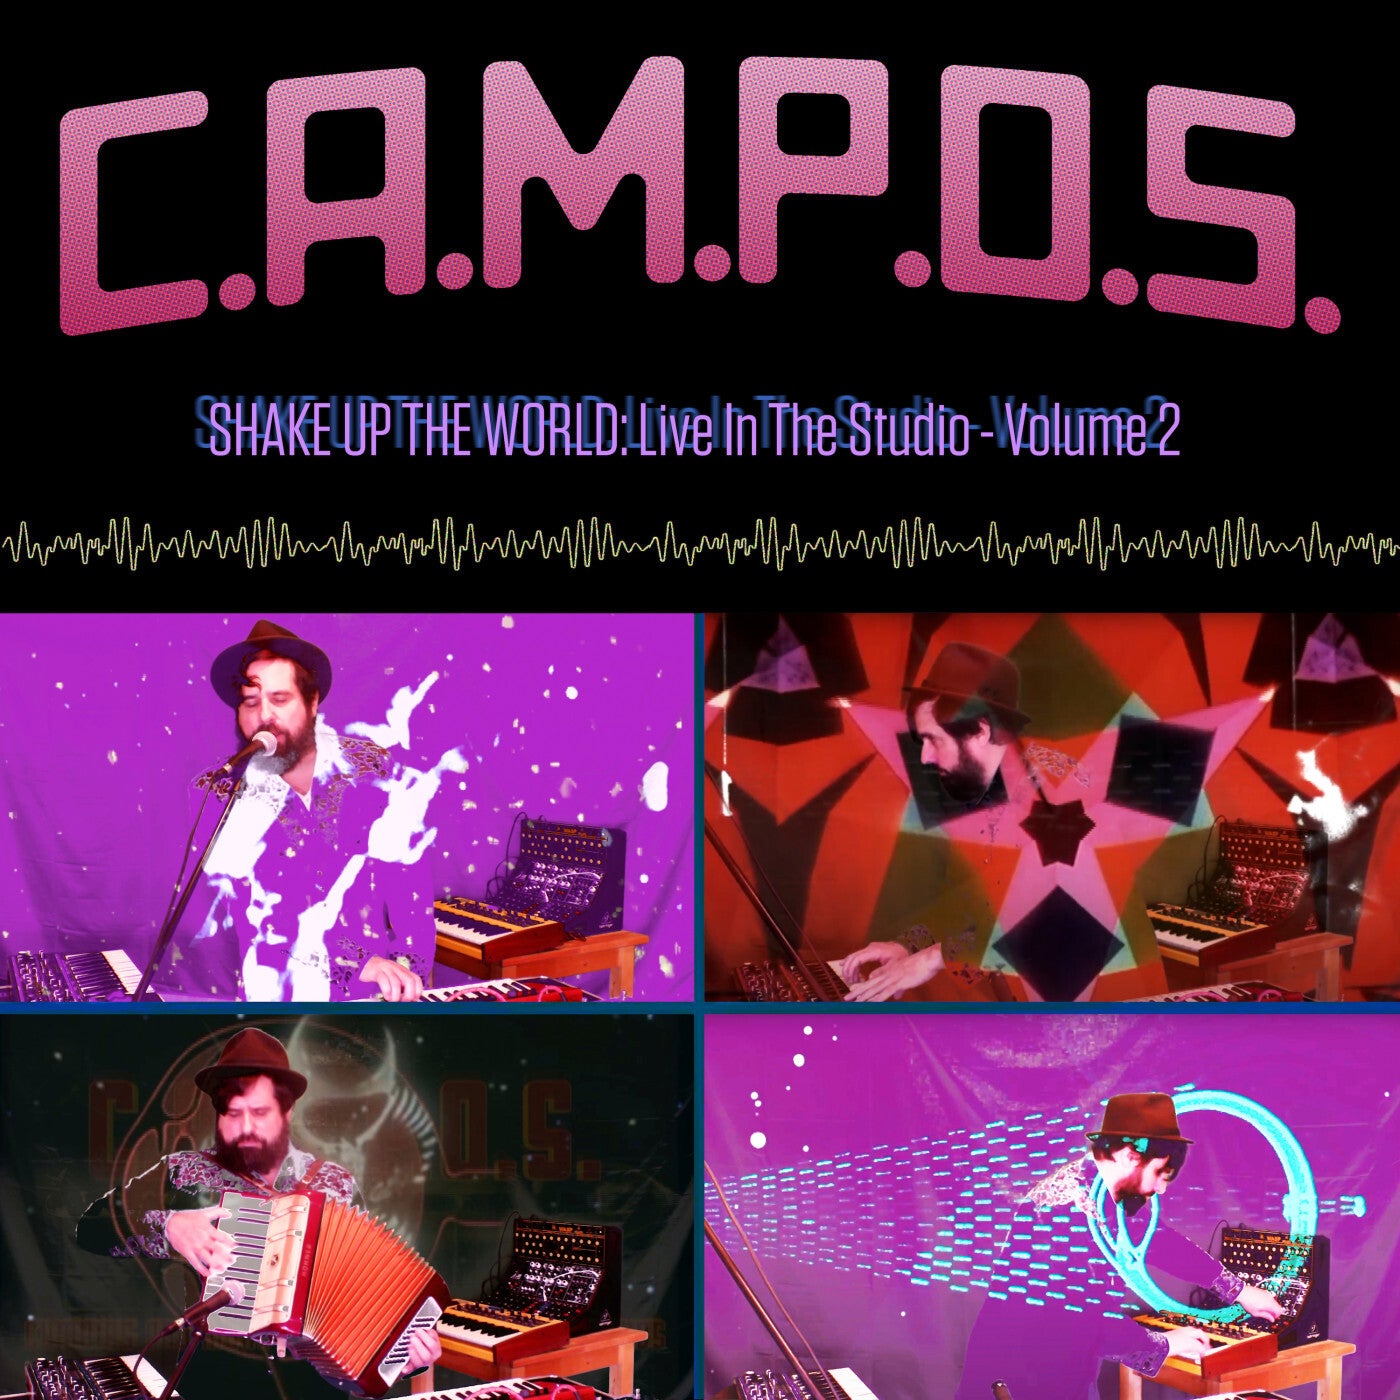 Shake Up the World: Live in the Studio, Volume 2